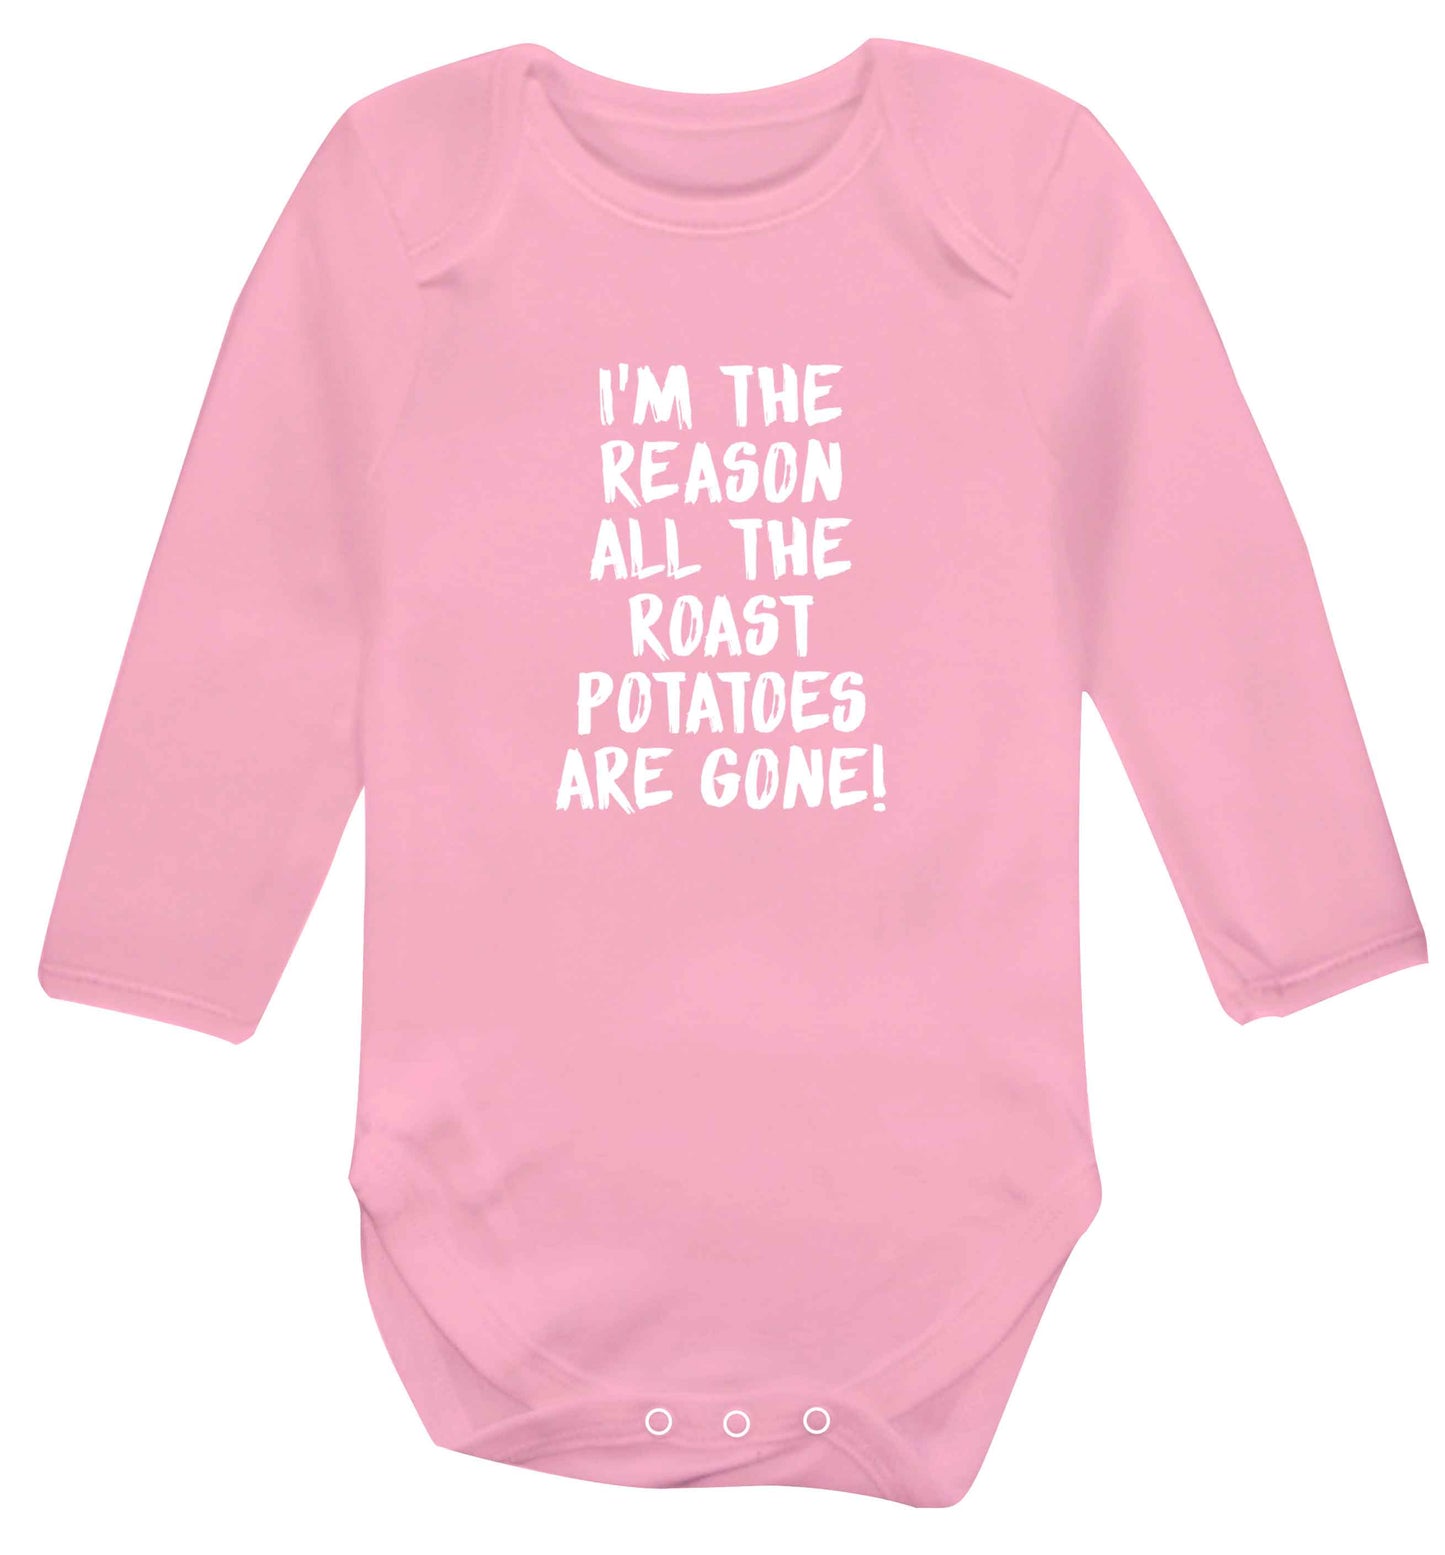 I'm the reason all the roast potatoes are gone baby vest long sleeved pale pink 6-12 months